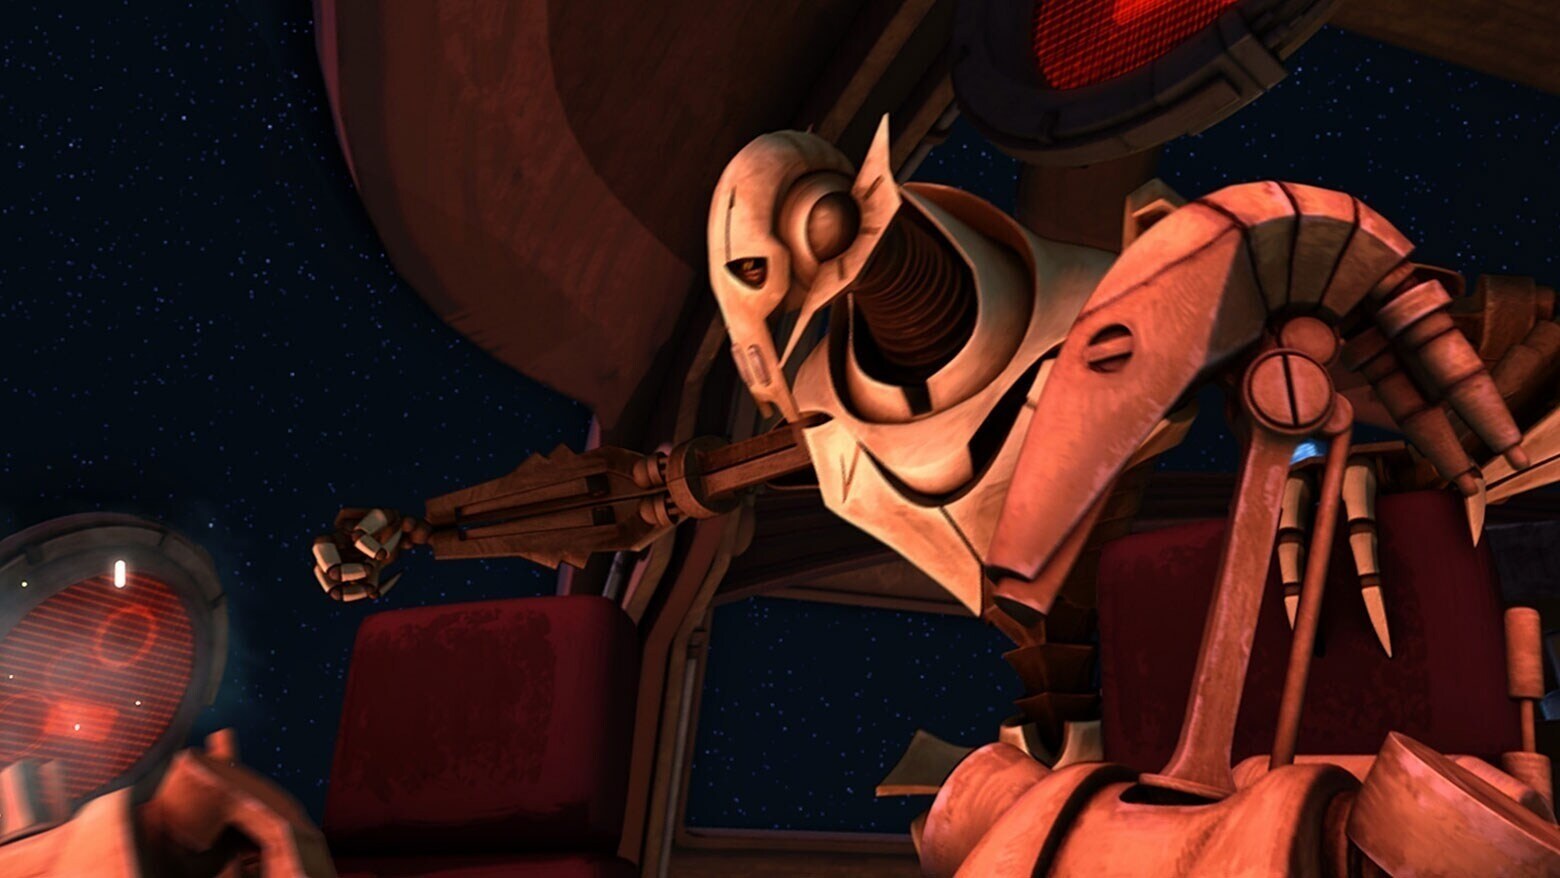 General Grievous in his warship, the Malevolence